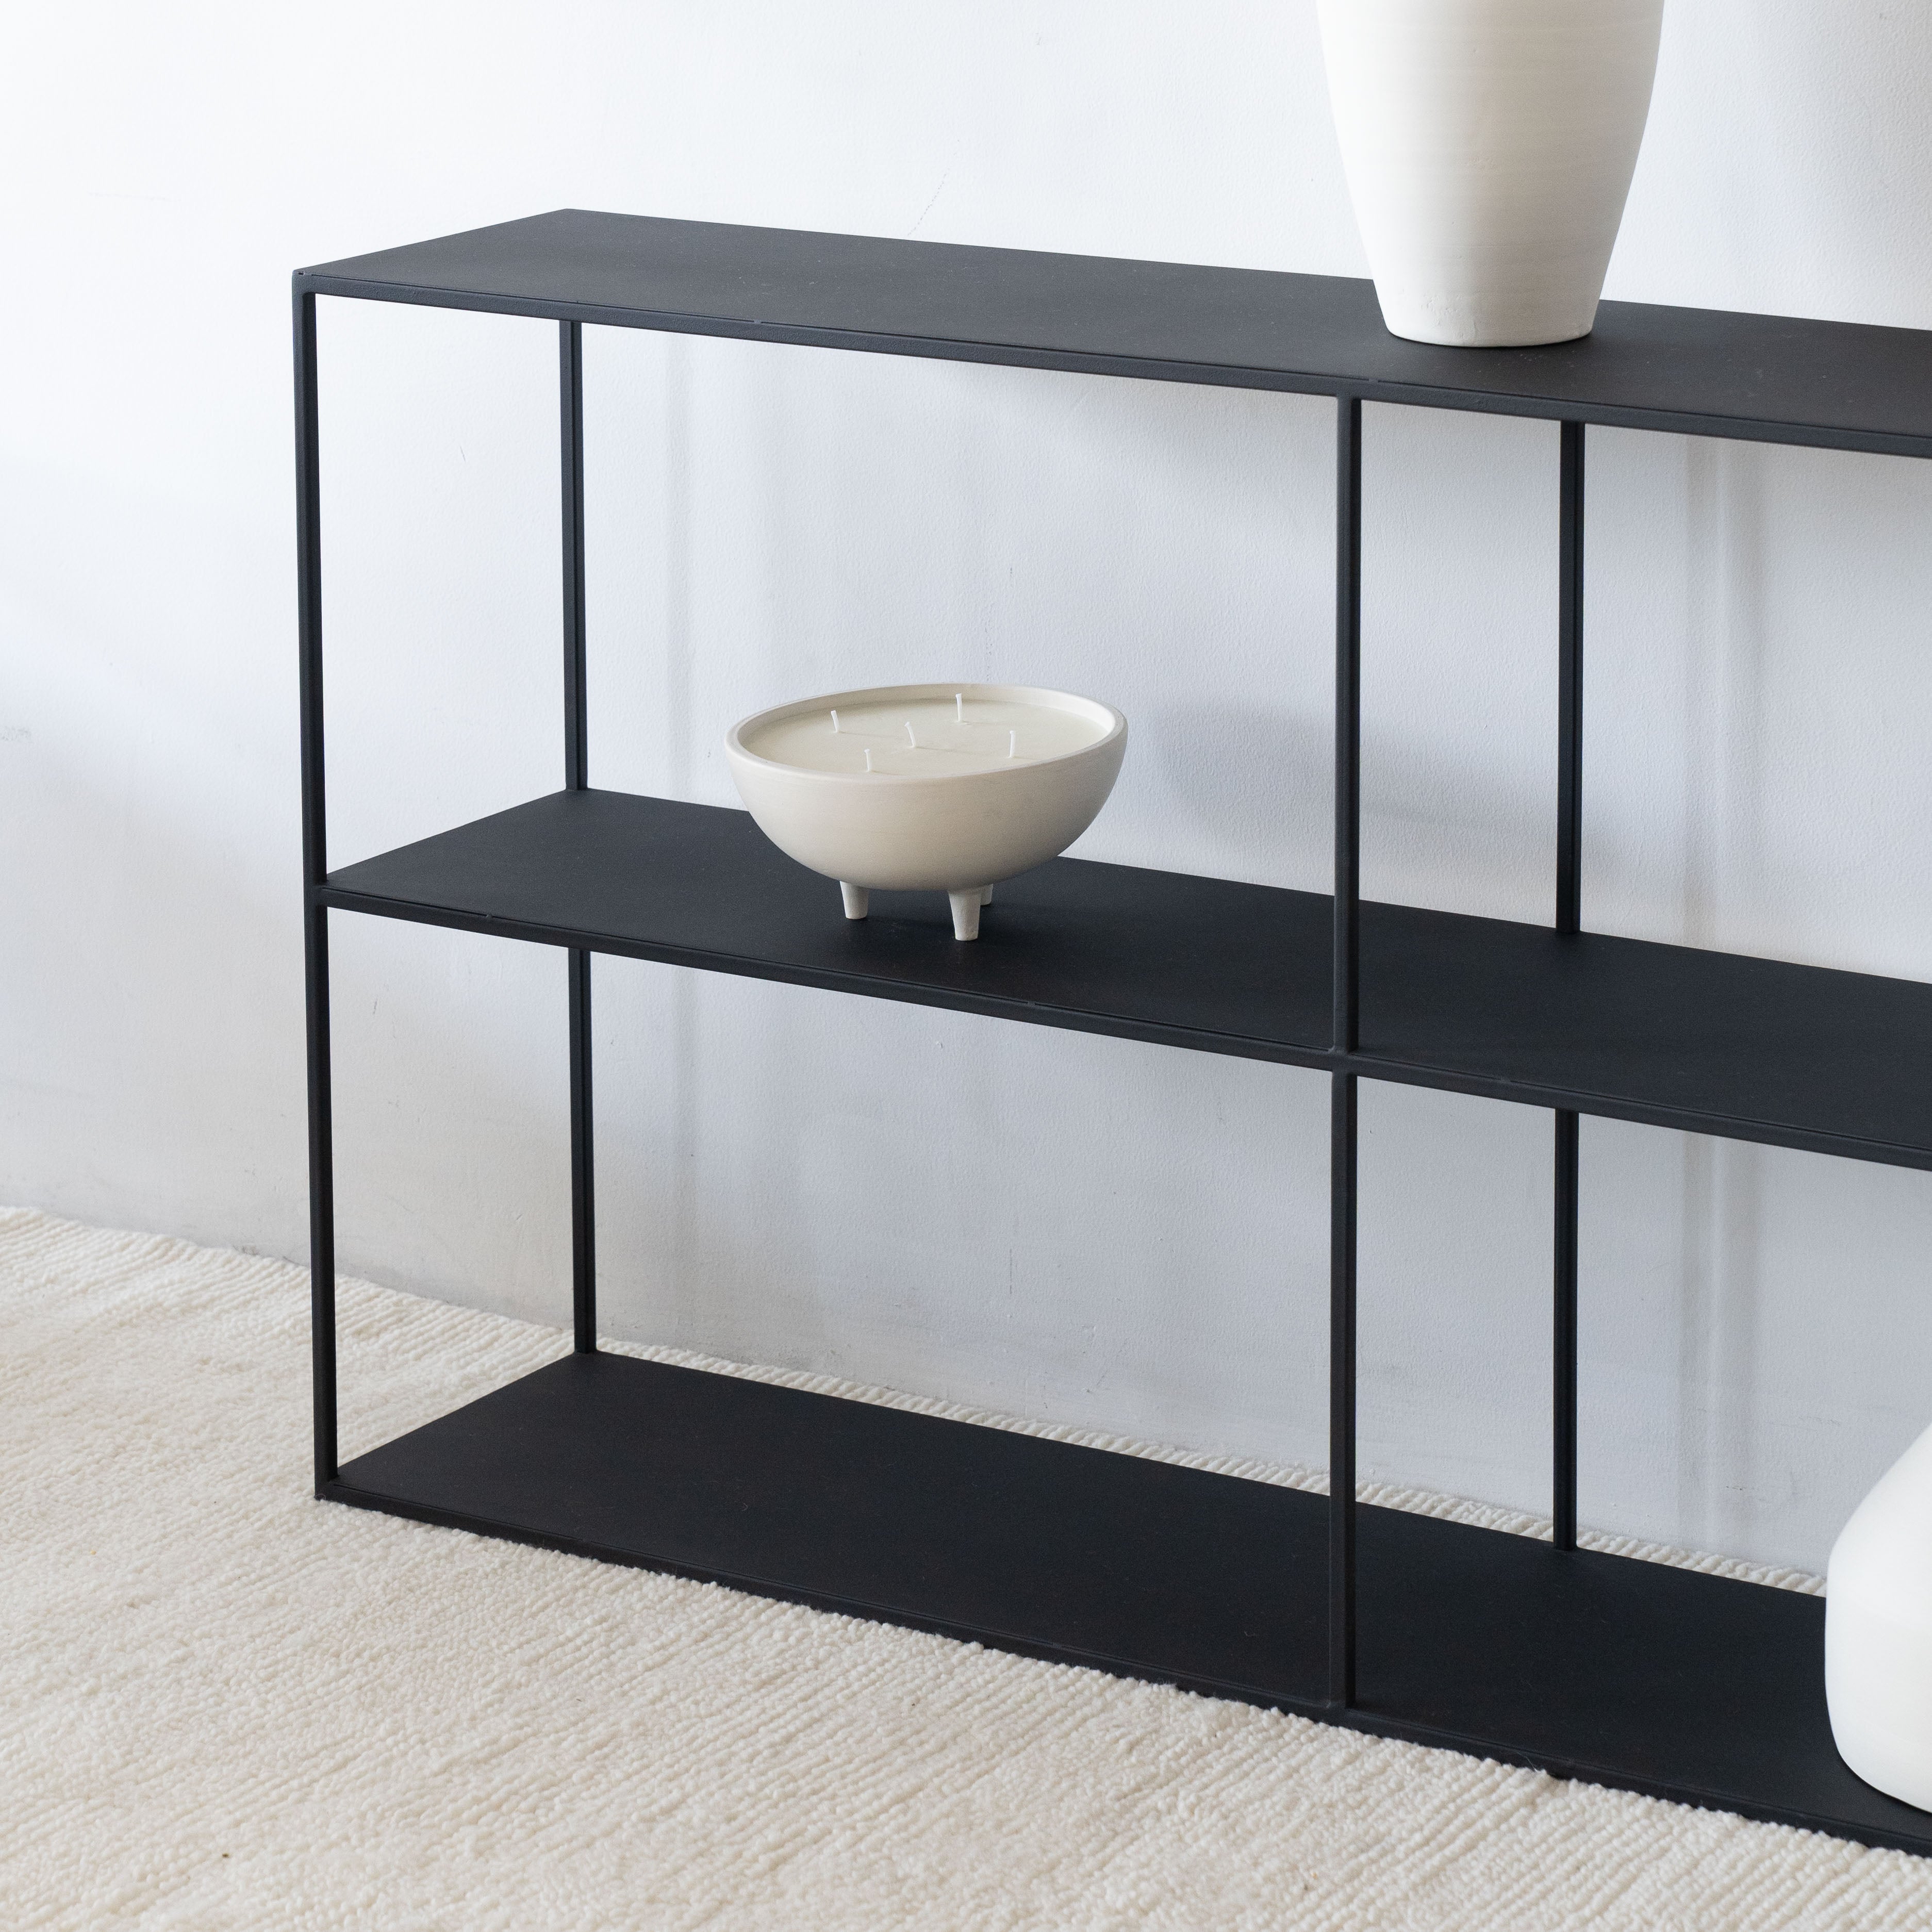 Monochrome Console Medium - Wood and Steel Furnitures